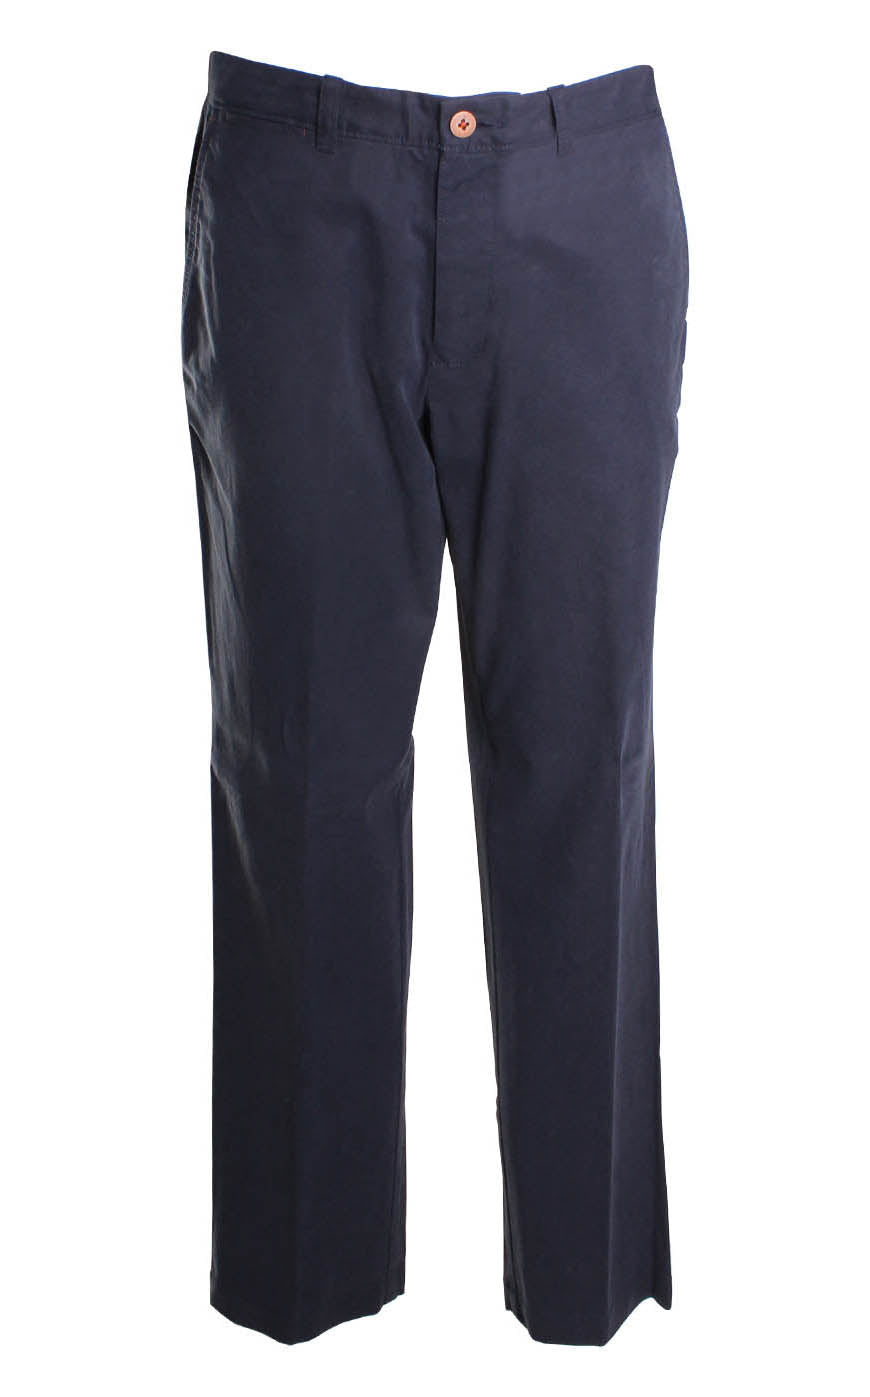 Tommy Bahama Bryant Flat Front Pant in Ink 